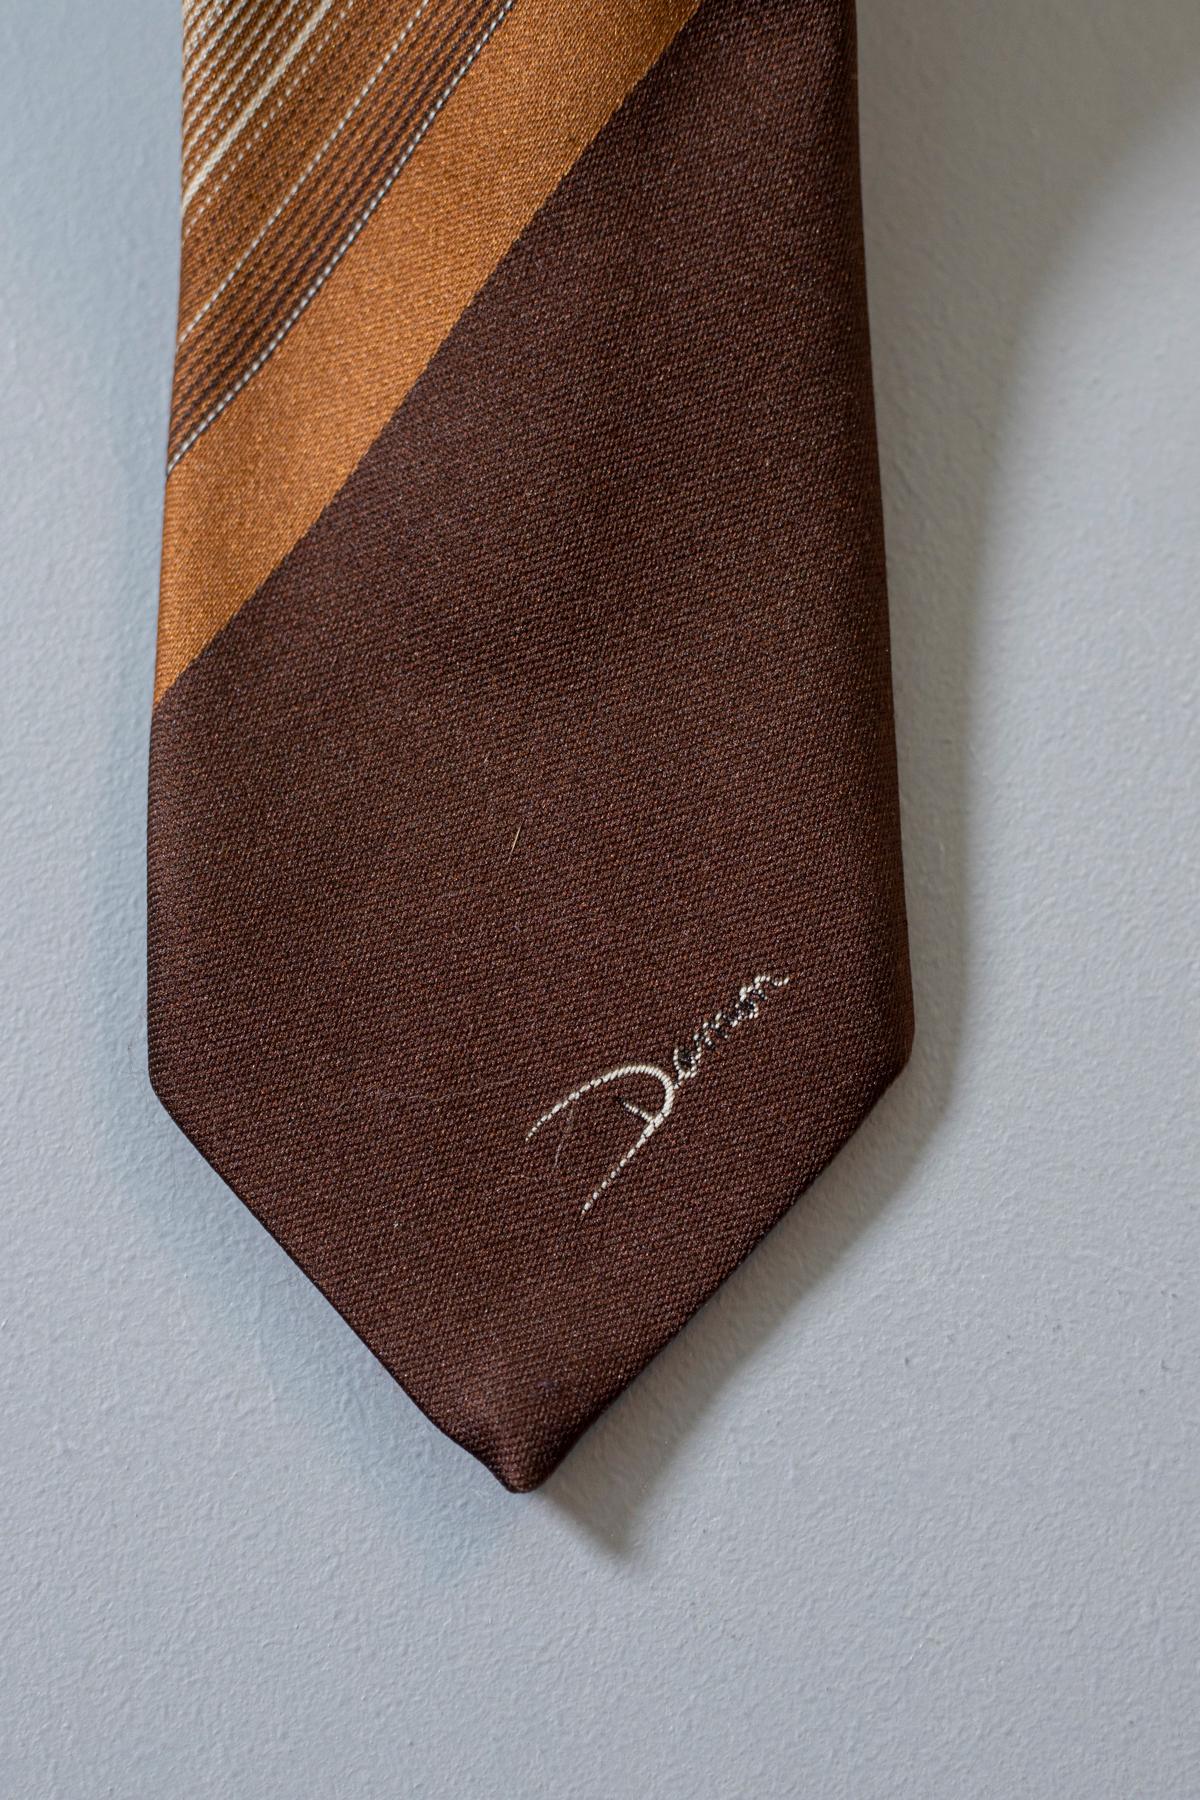 Elegant tie signed Damon, made of 100% silk, with a simple but at the same time never banal design. decorated with stripes of different shades of brown, ideal for a job interview or a romantic dinner for two. 
We recommend combining it with a solid